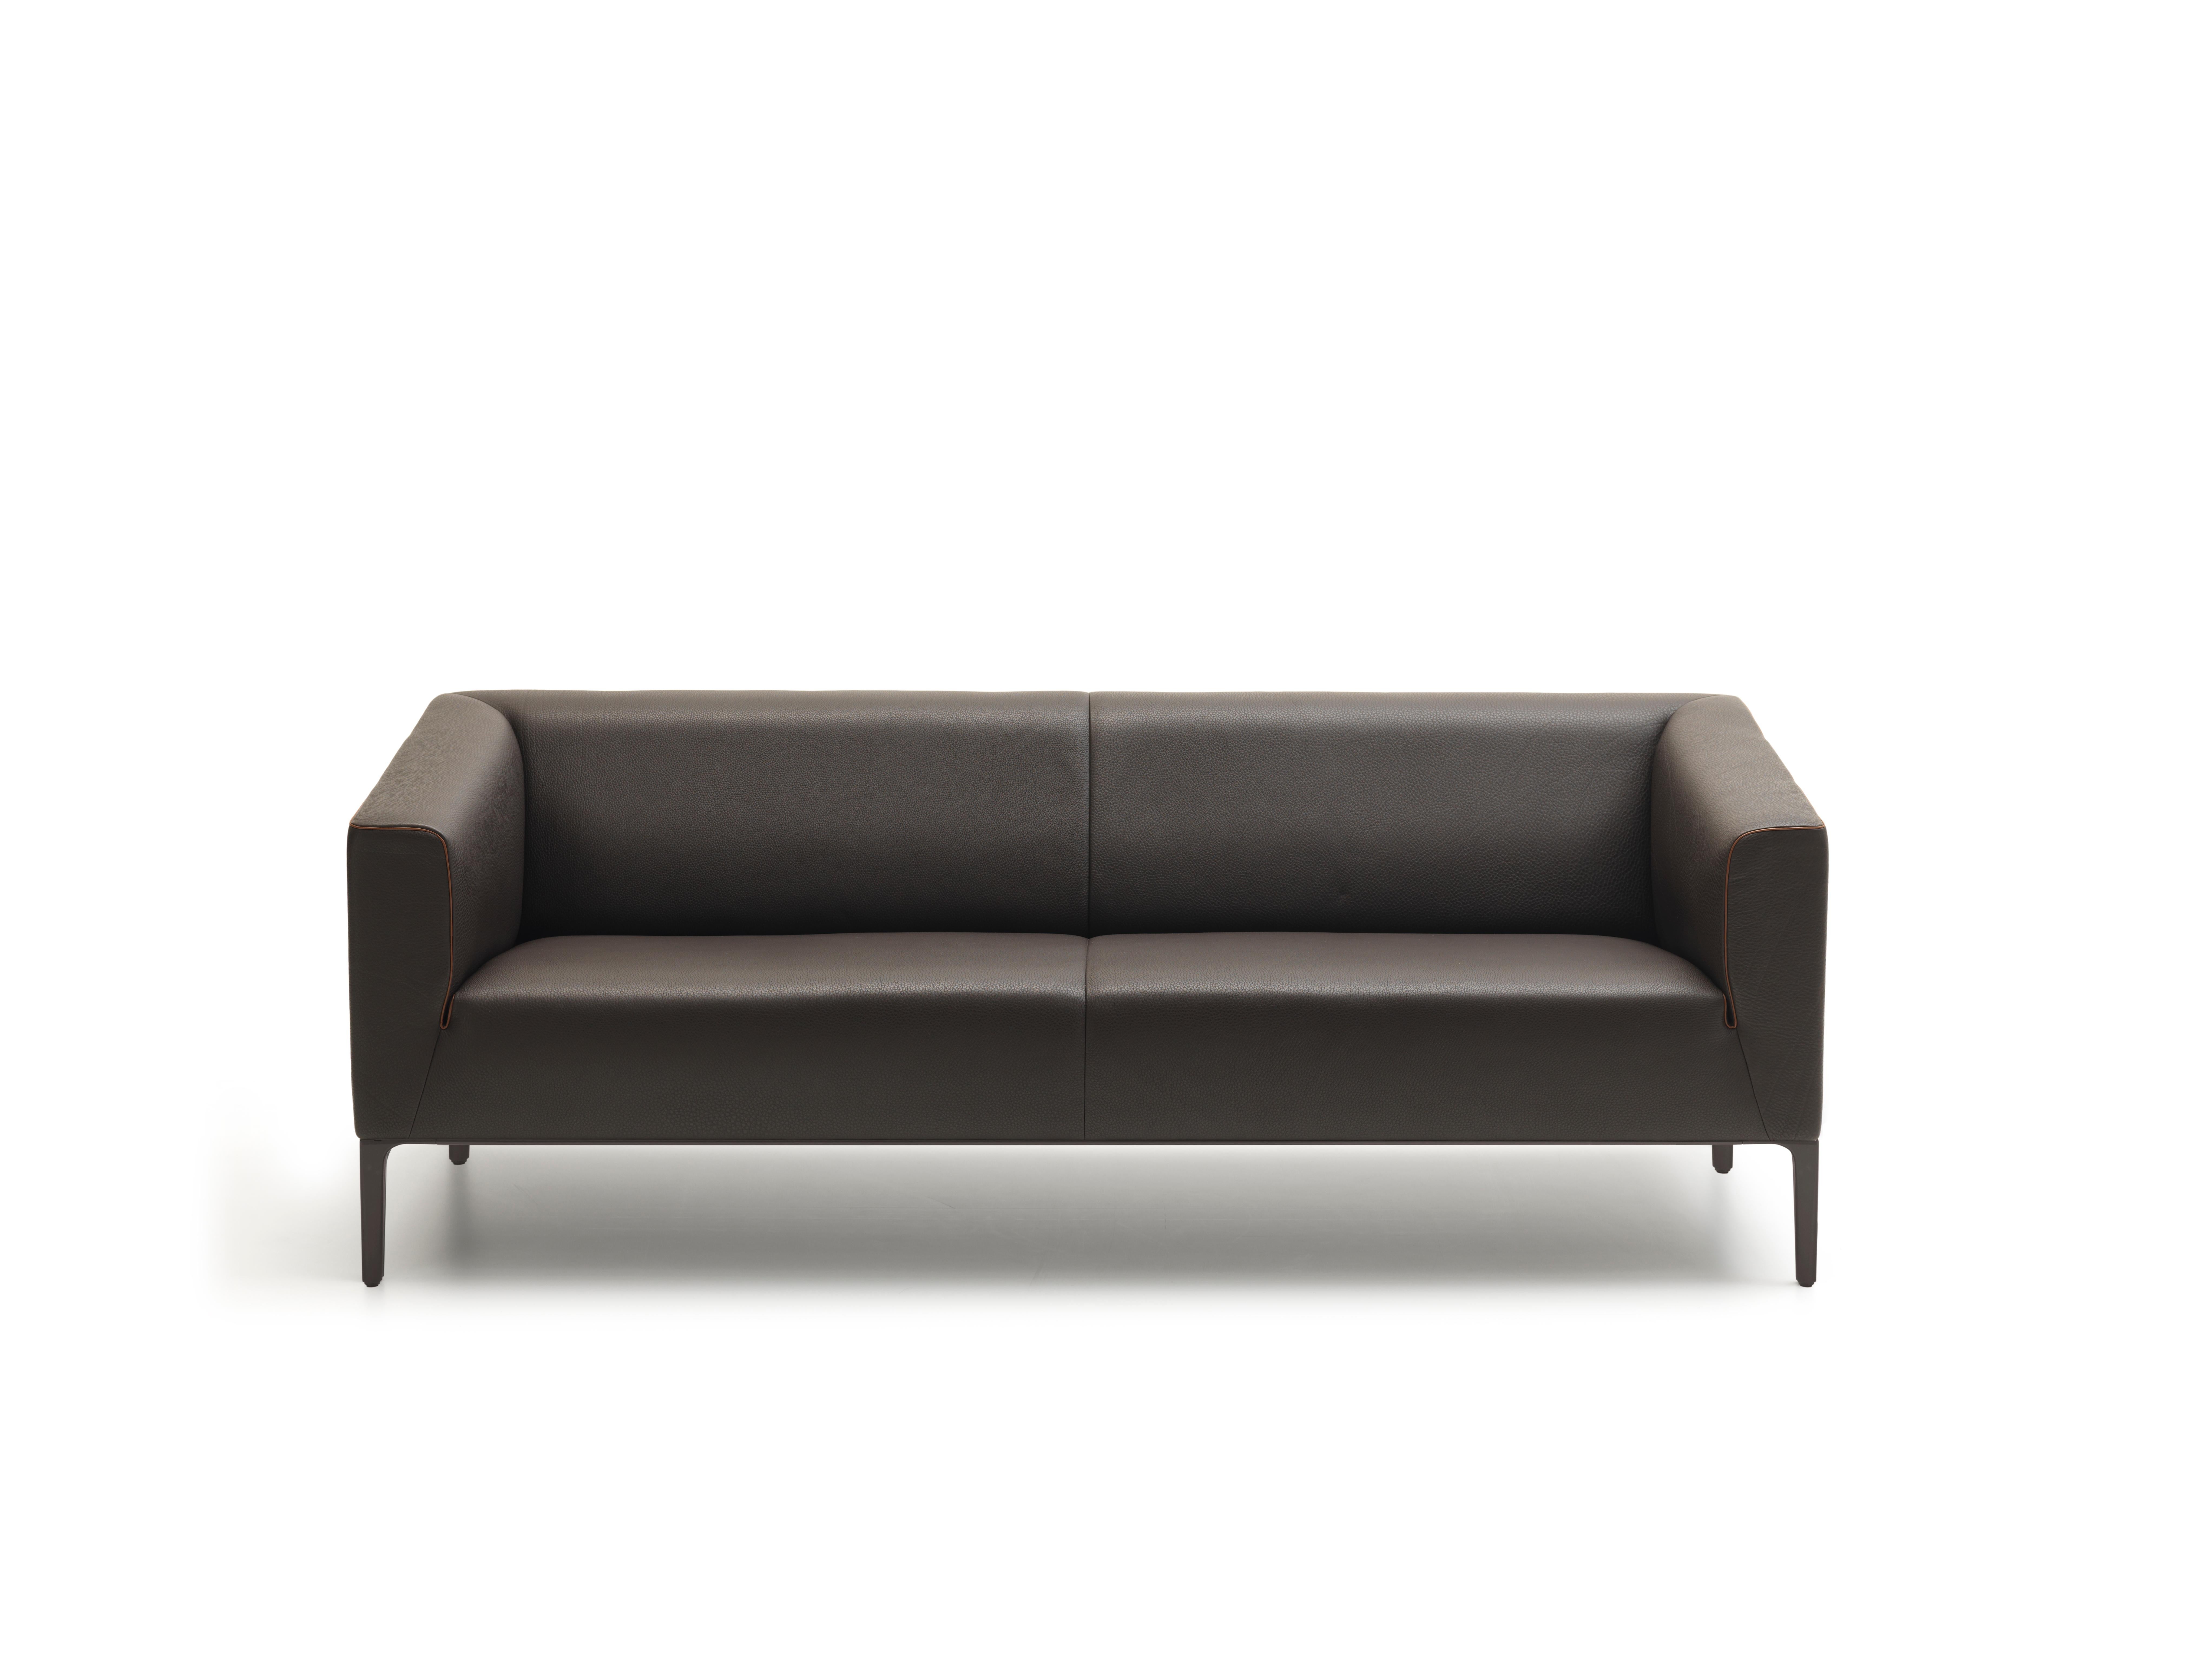 DS-161 sofa by De Sede
Dimensions: D 54 x W 196 x H 72 cm
Materials: aluminium, leather

Prices may change according to the chosen materials and size. 

A linear outer contour and round interior – the elegant piping of the contour focuses the